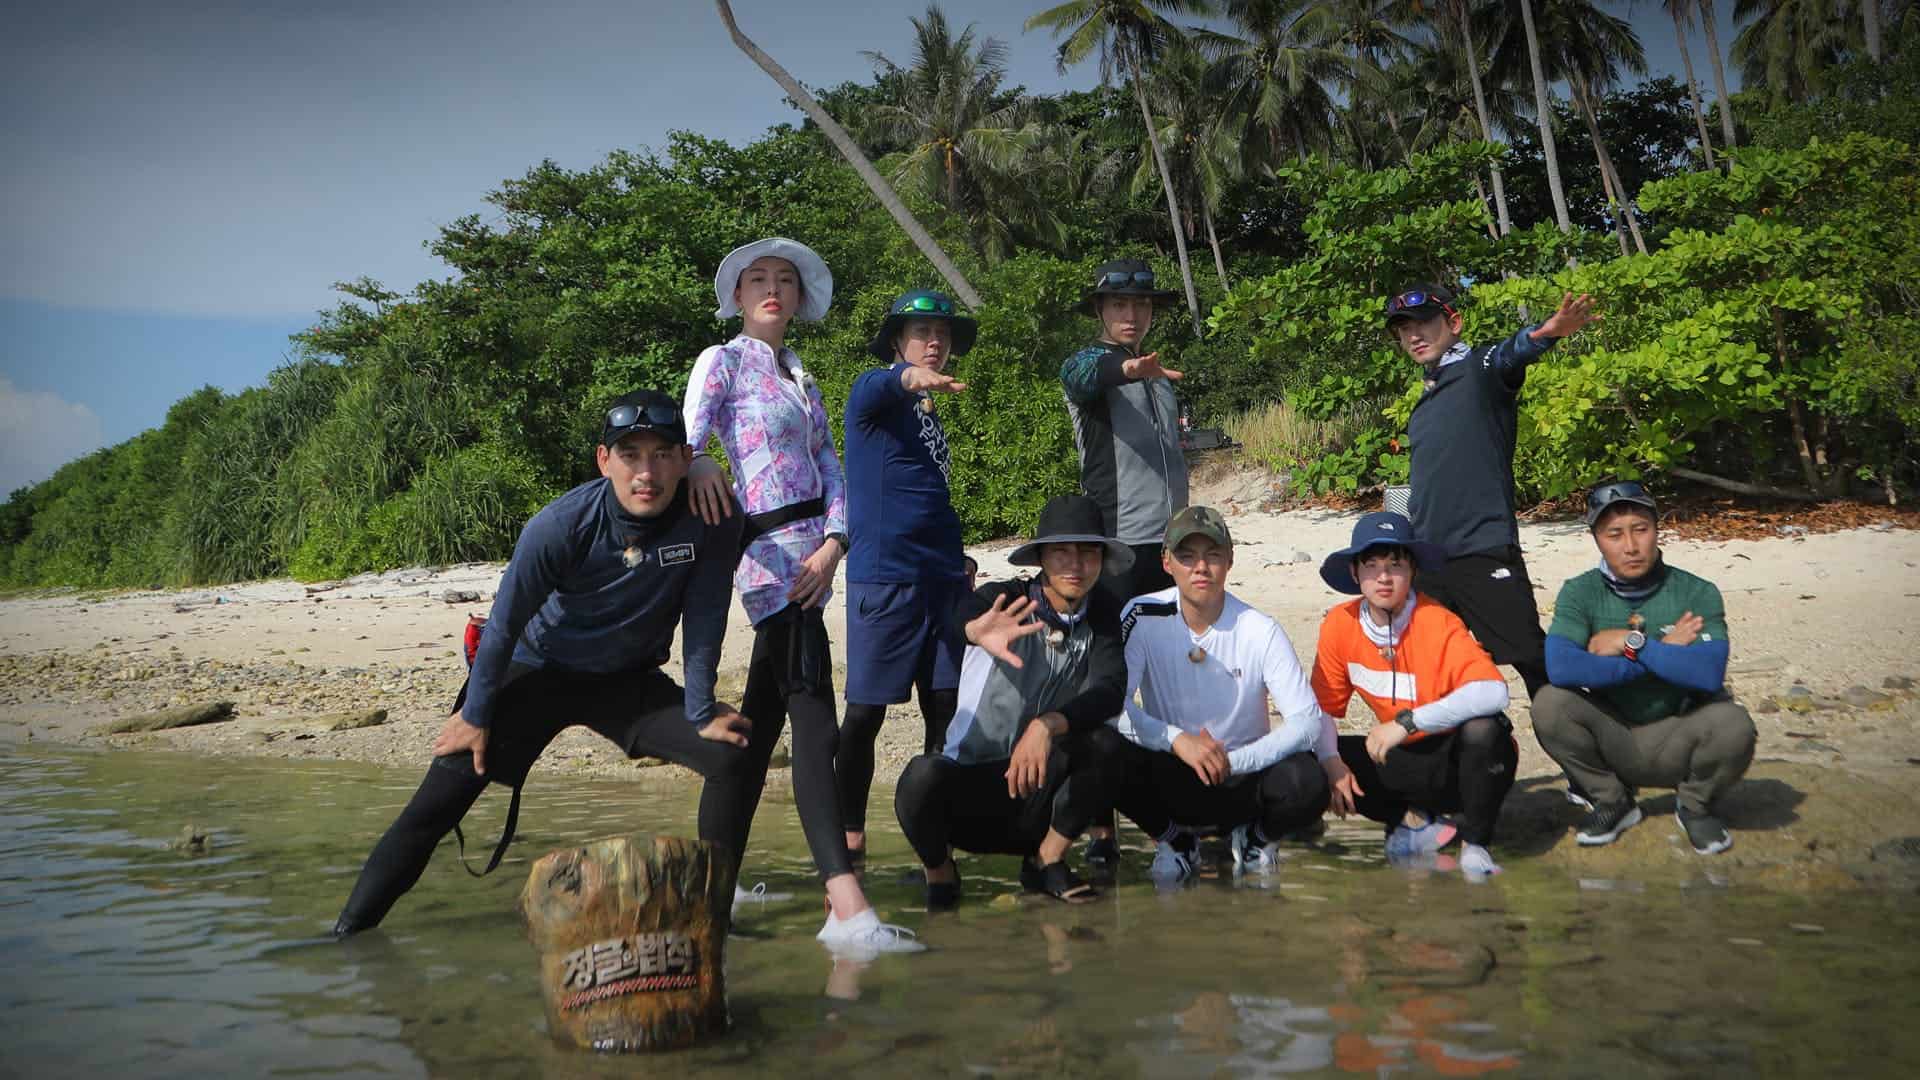 Law of the jungle